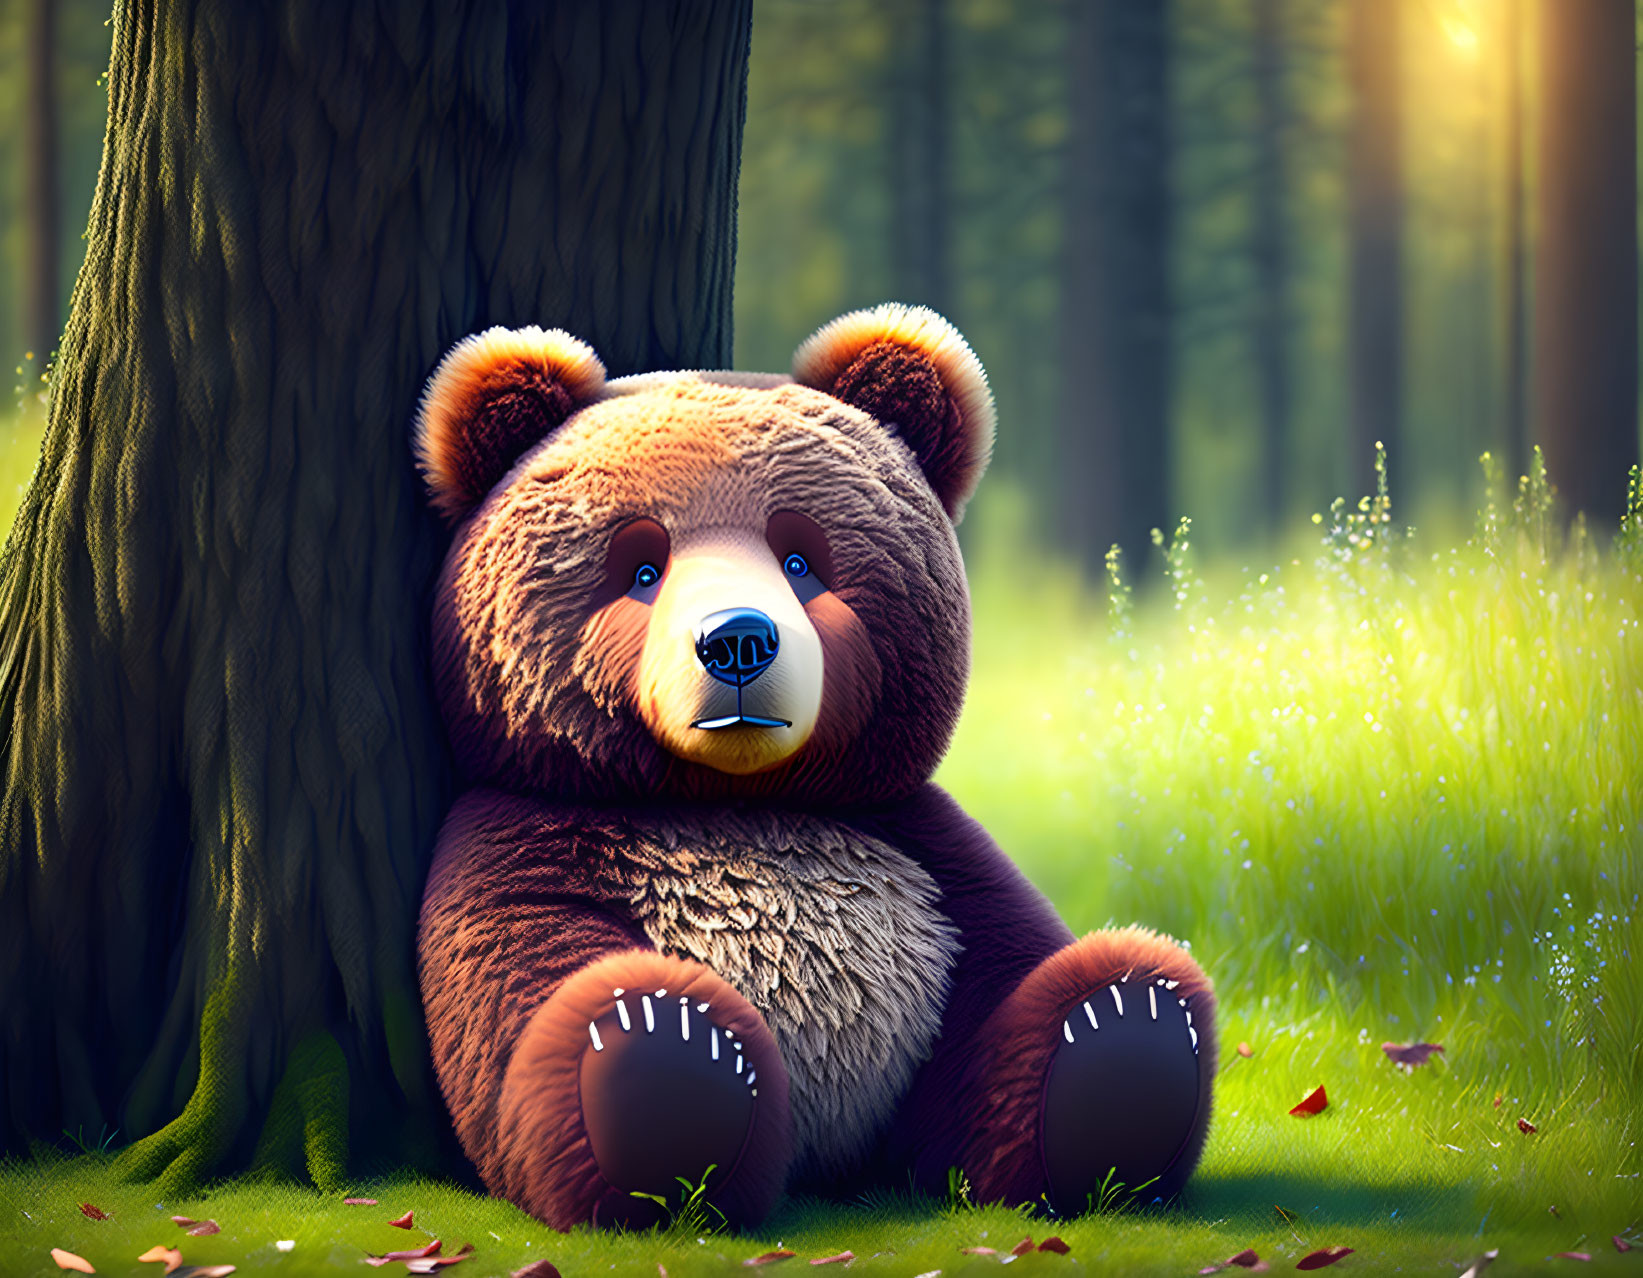 Plush teddy bear in sunlit forest clearing